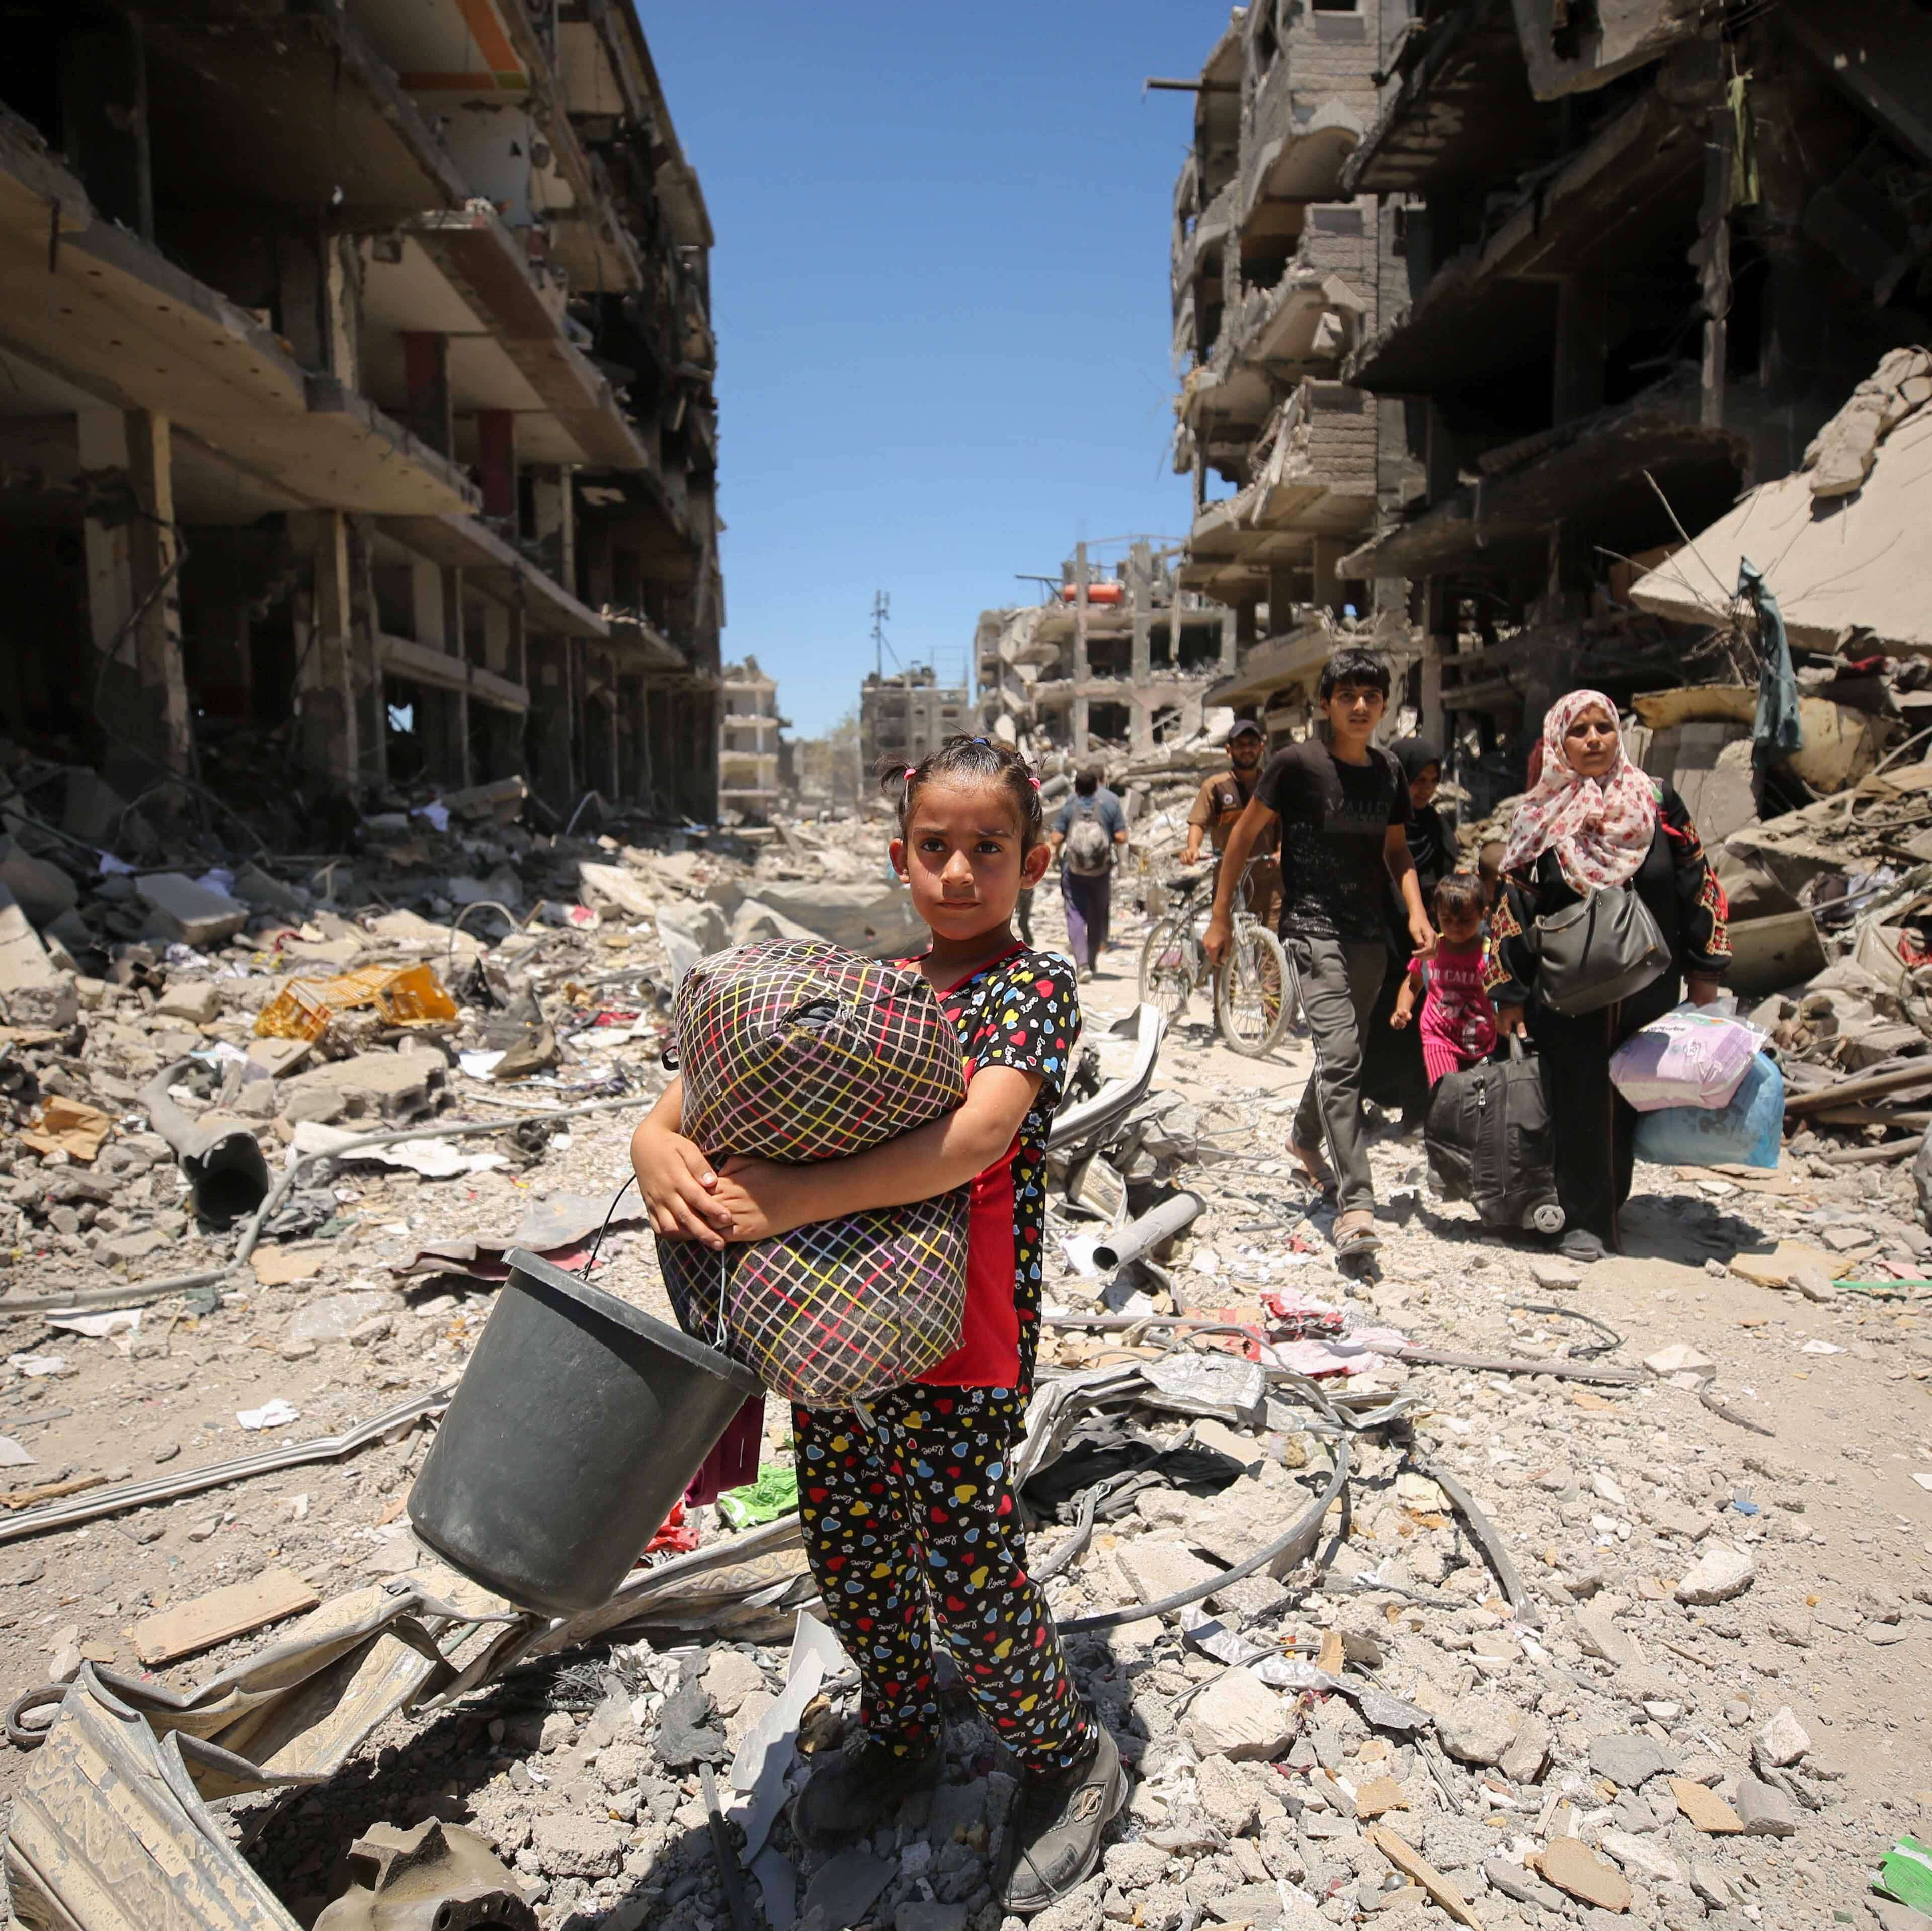 A girl holds belongings as she walks through rubble between destroyed buildings while people follow behind her in Gaza.